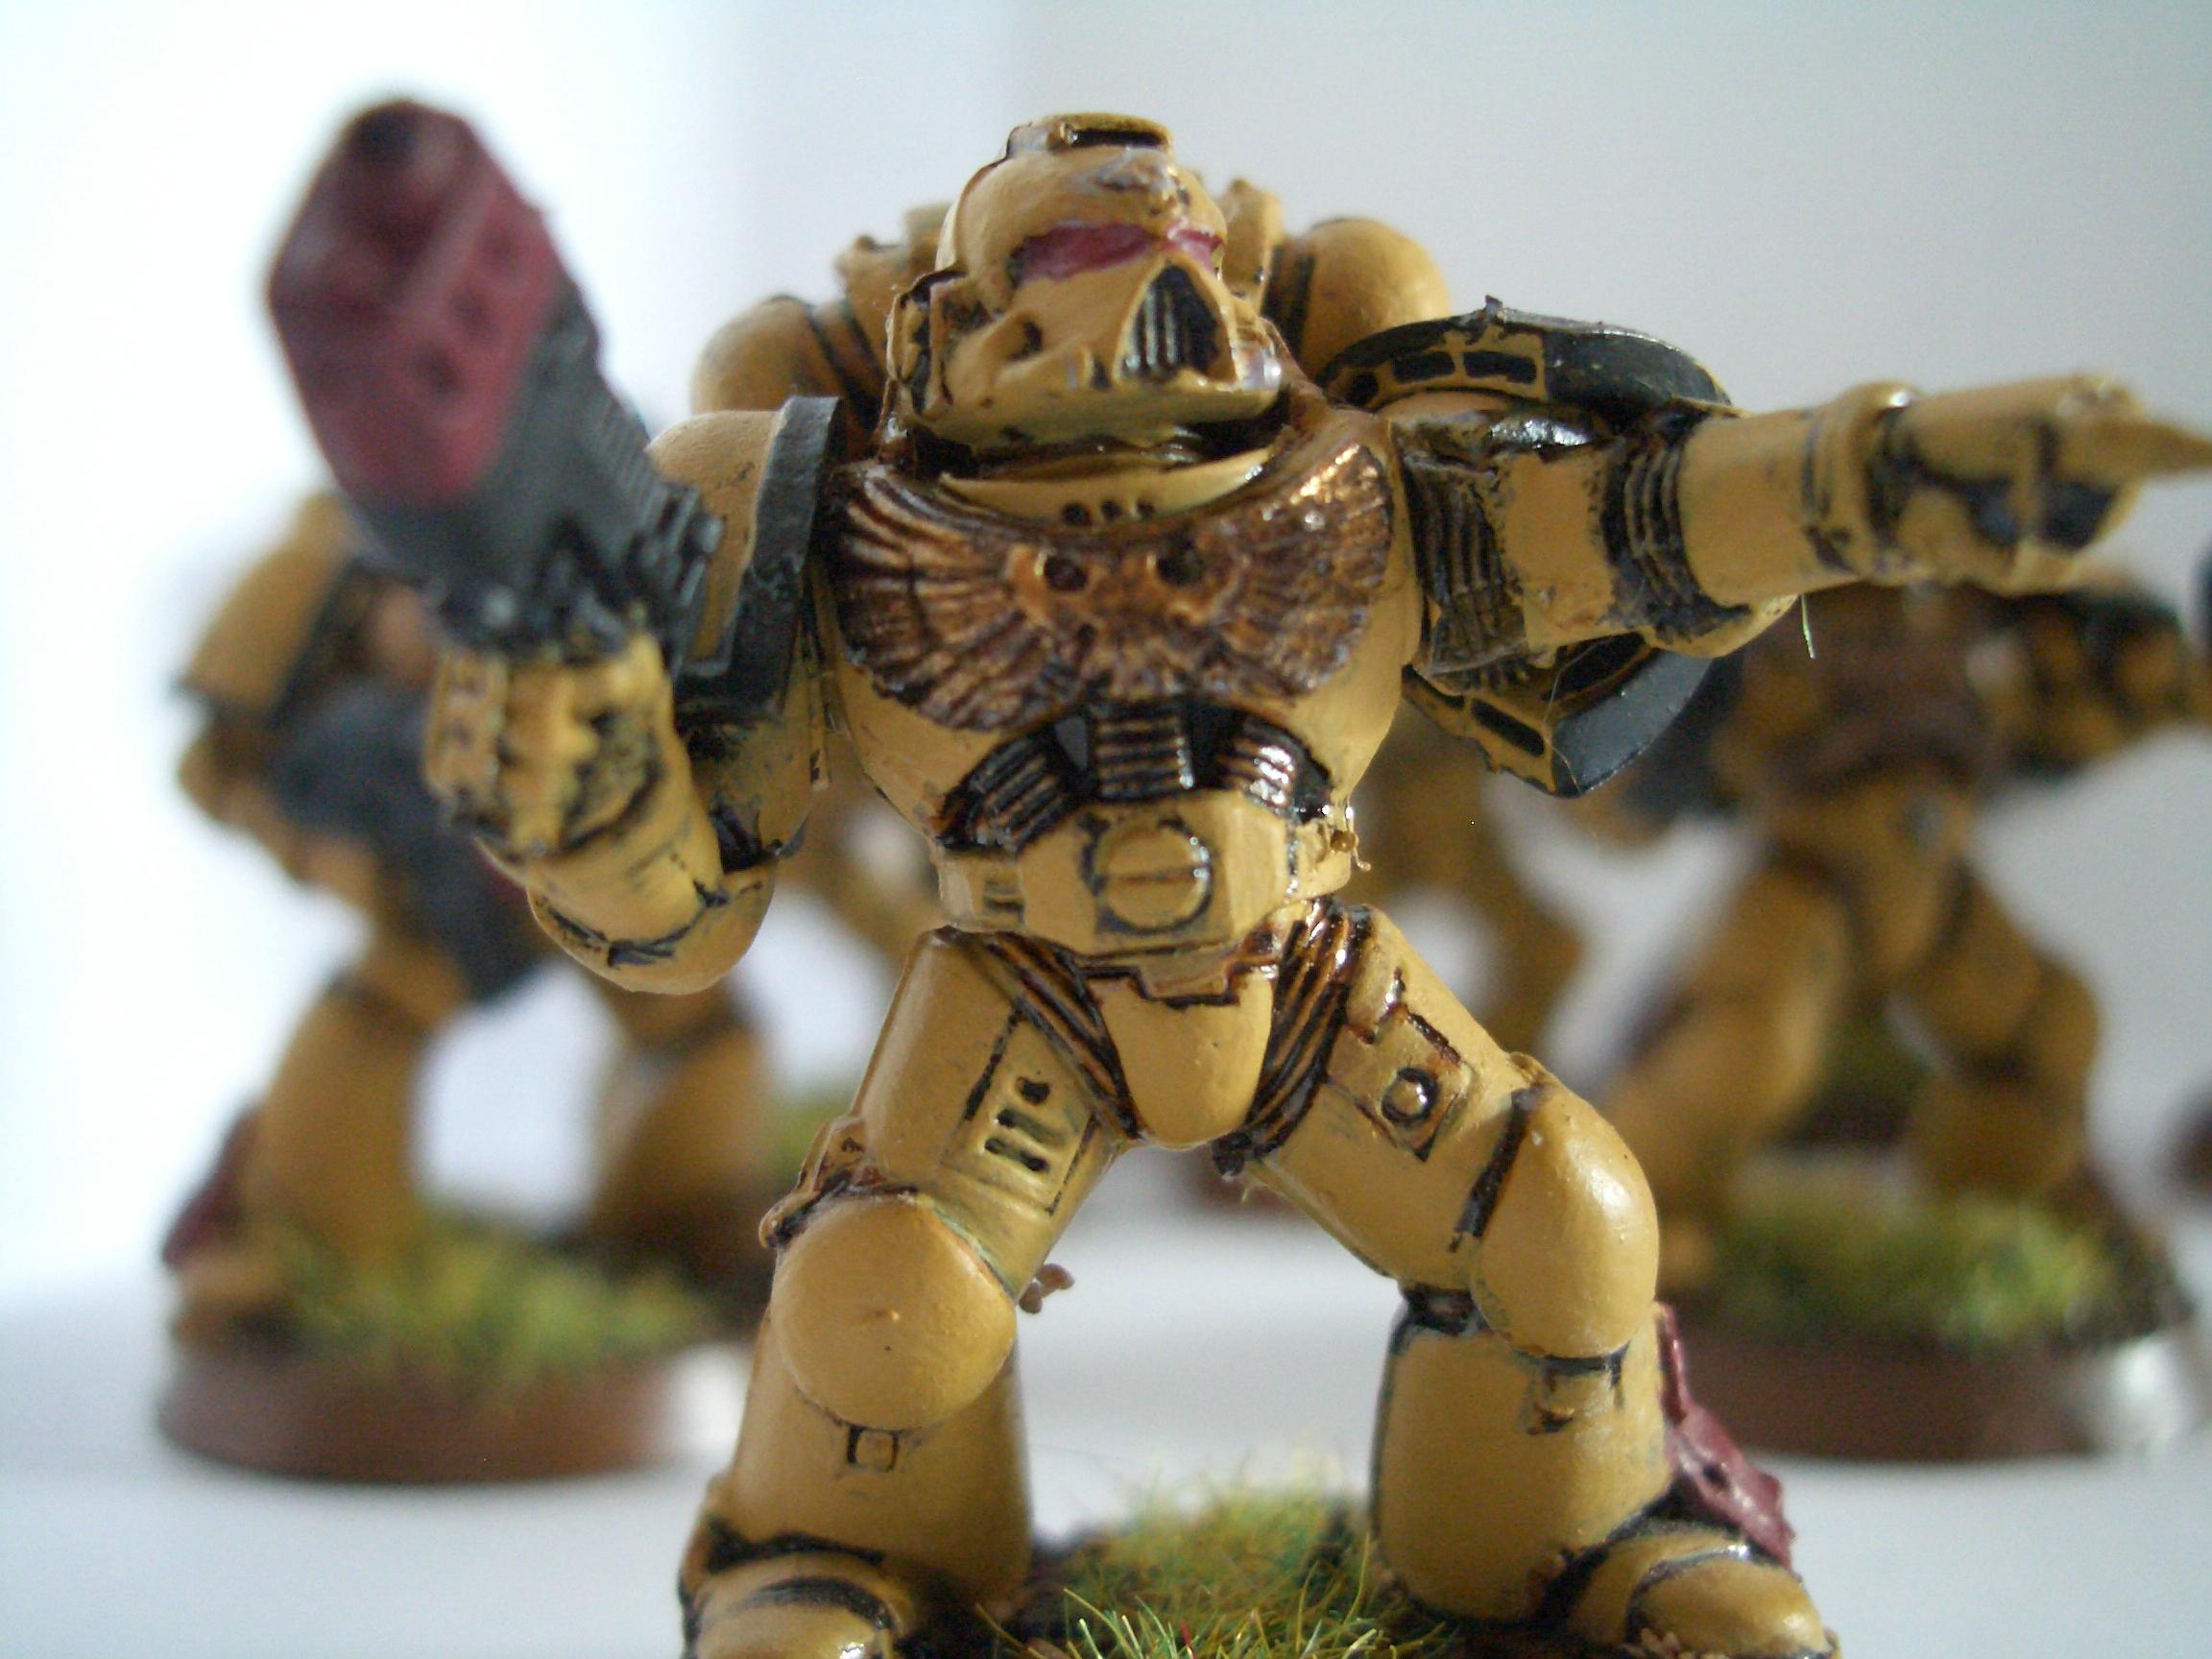 Imperial Fists, Space Marines, Warhammer 40,000, Work In Progress, Yellow Space Marines